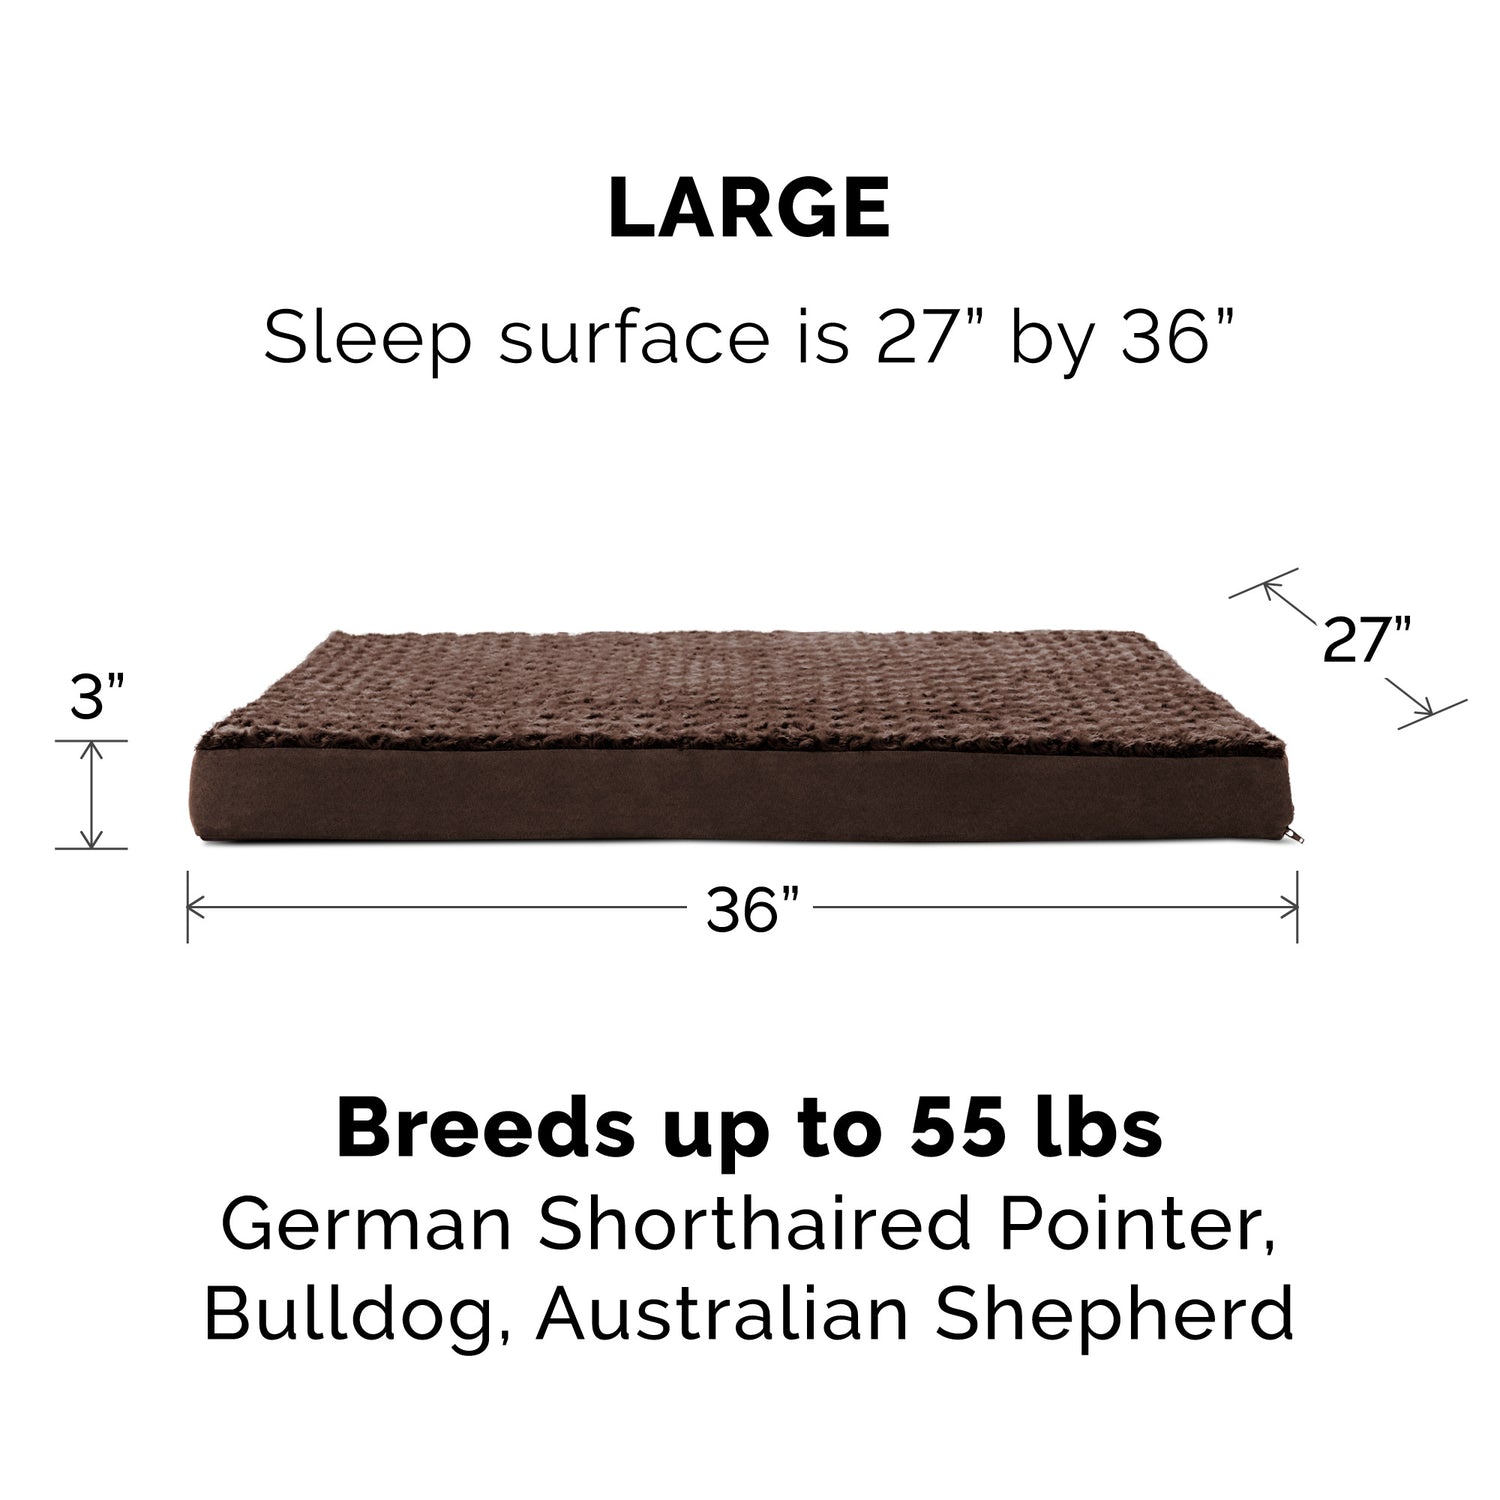 Furhaven Pet Dog Bed | Deluxe Memory Foam Ultra Plush Mattress Pet Bed for Dogs & Cats, Chocolate, Large